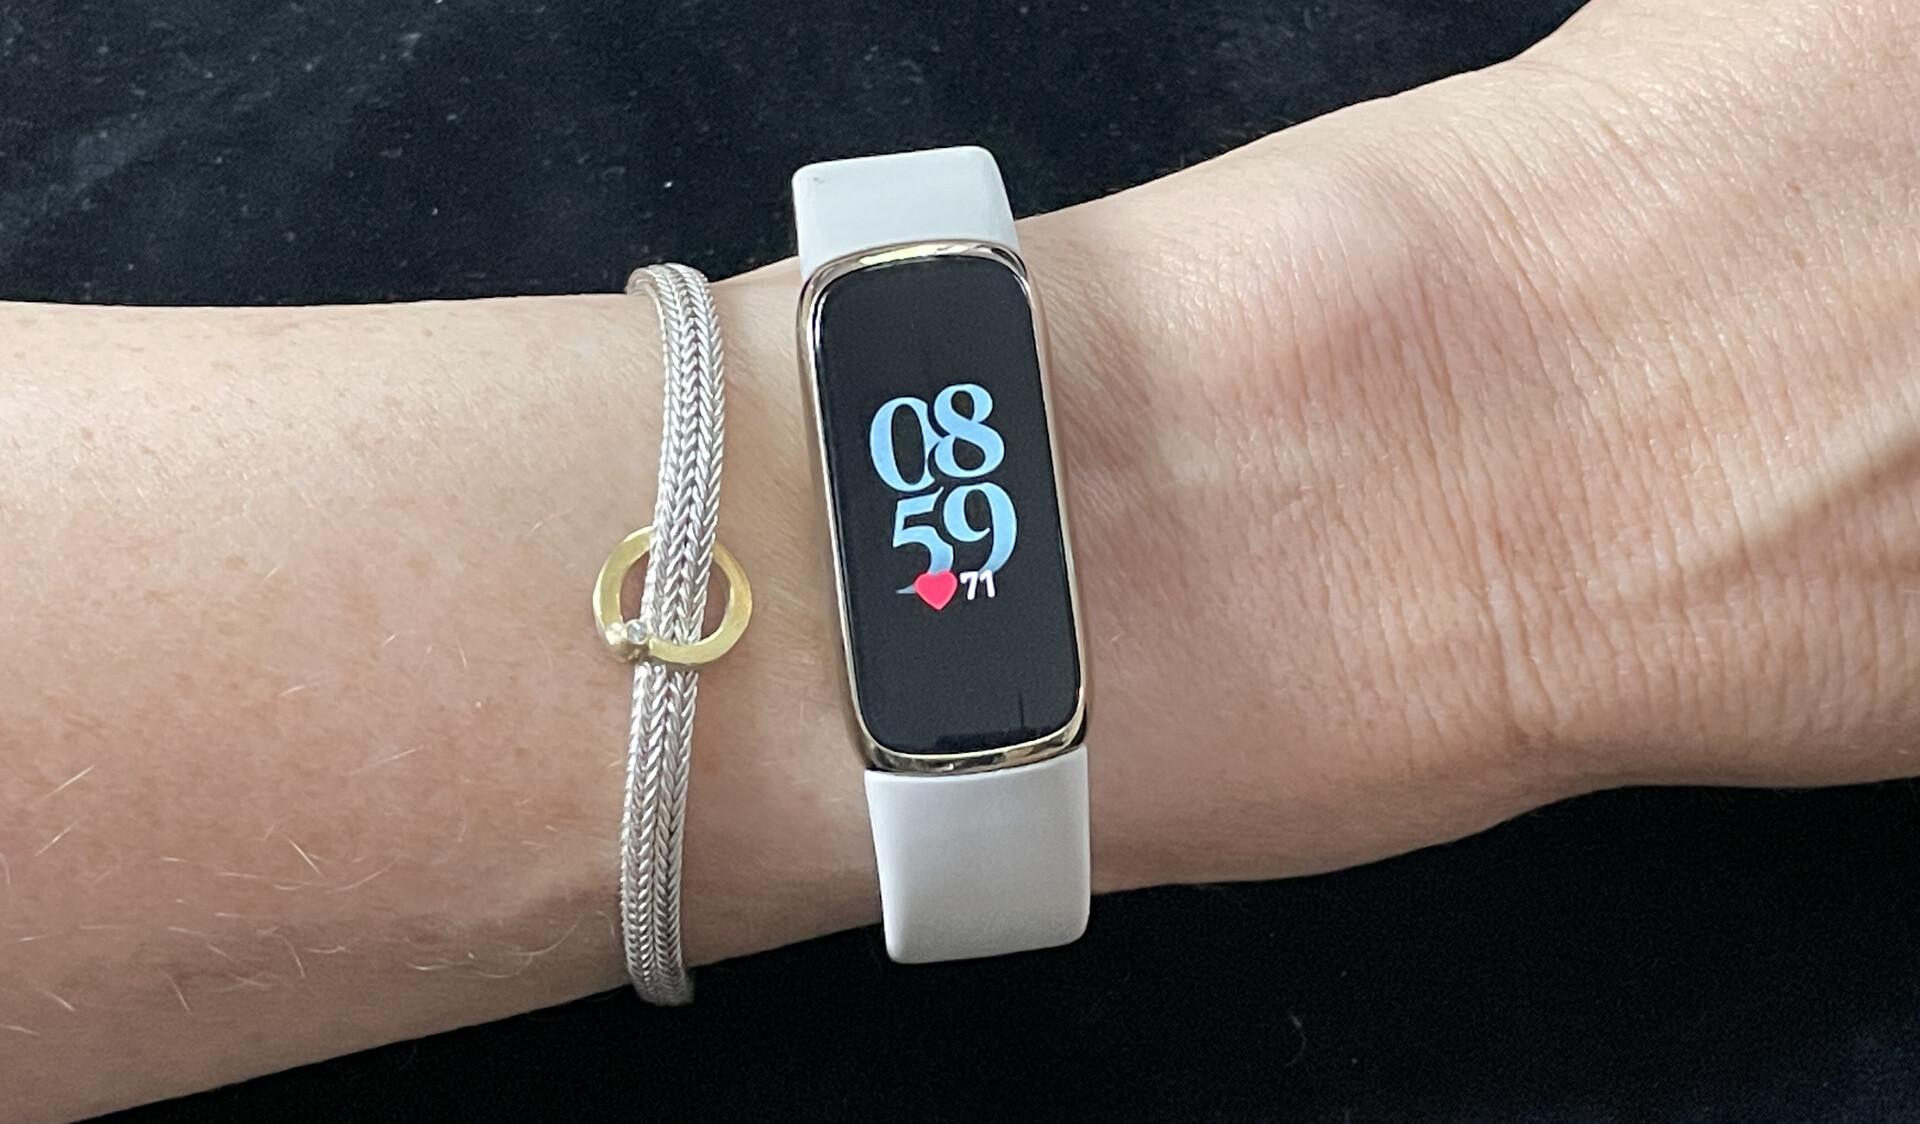 Fitbit Luxe, review y opiniones, Desde 72,40 €